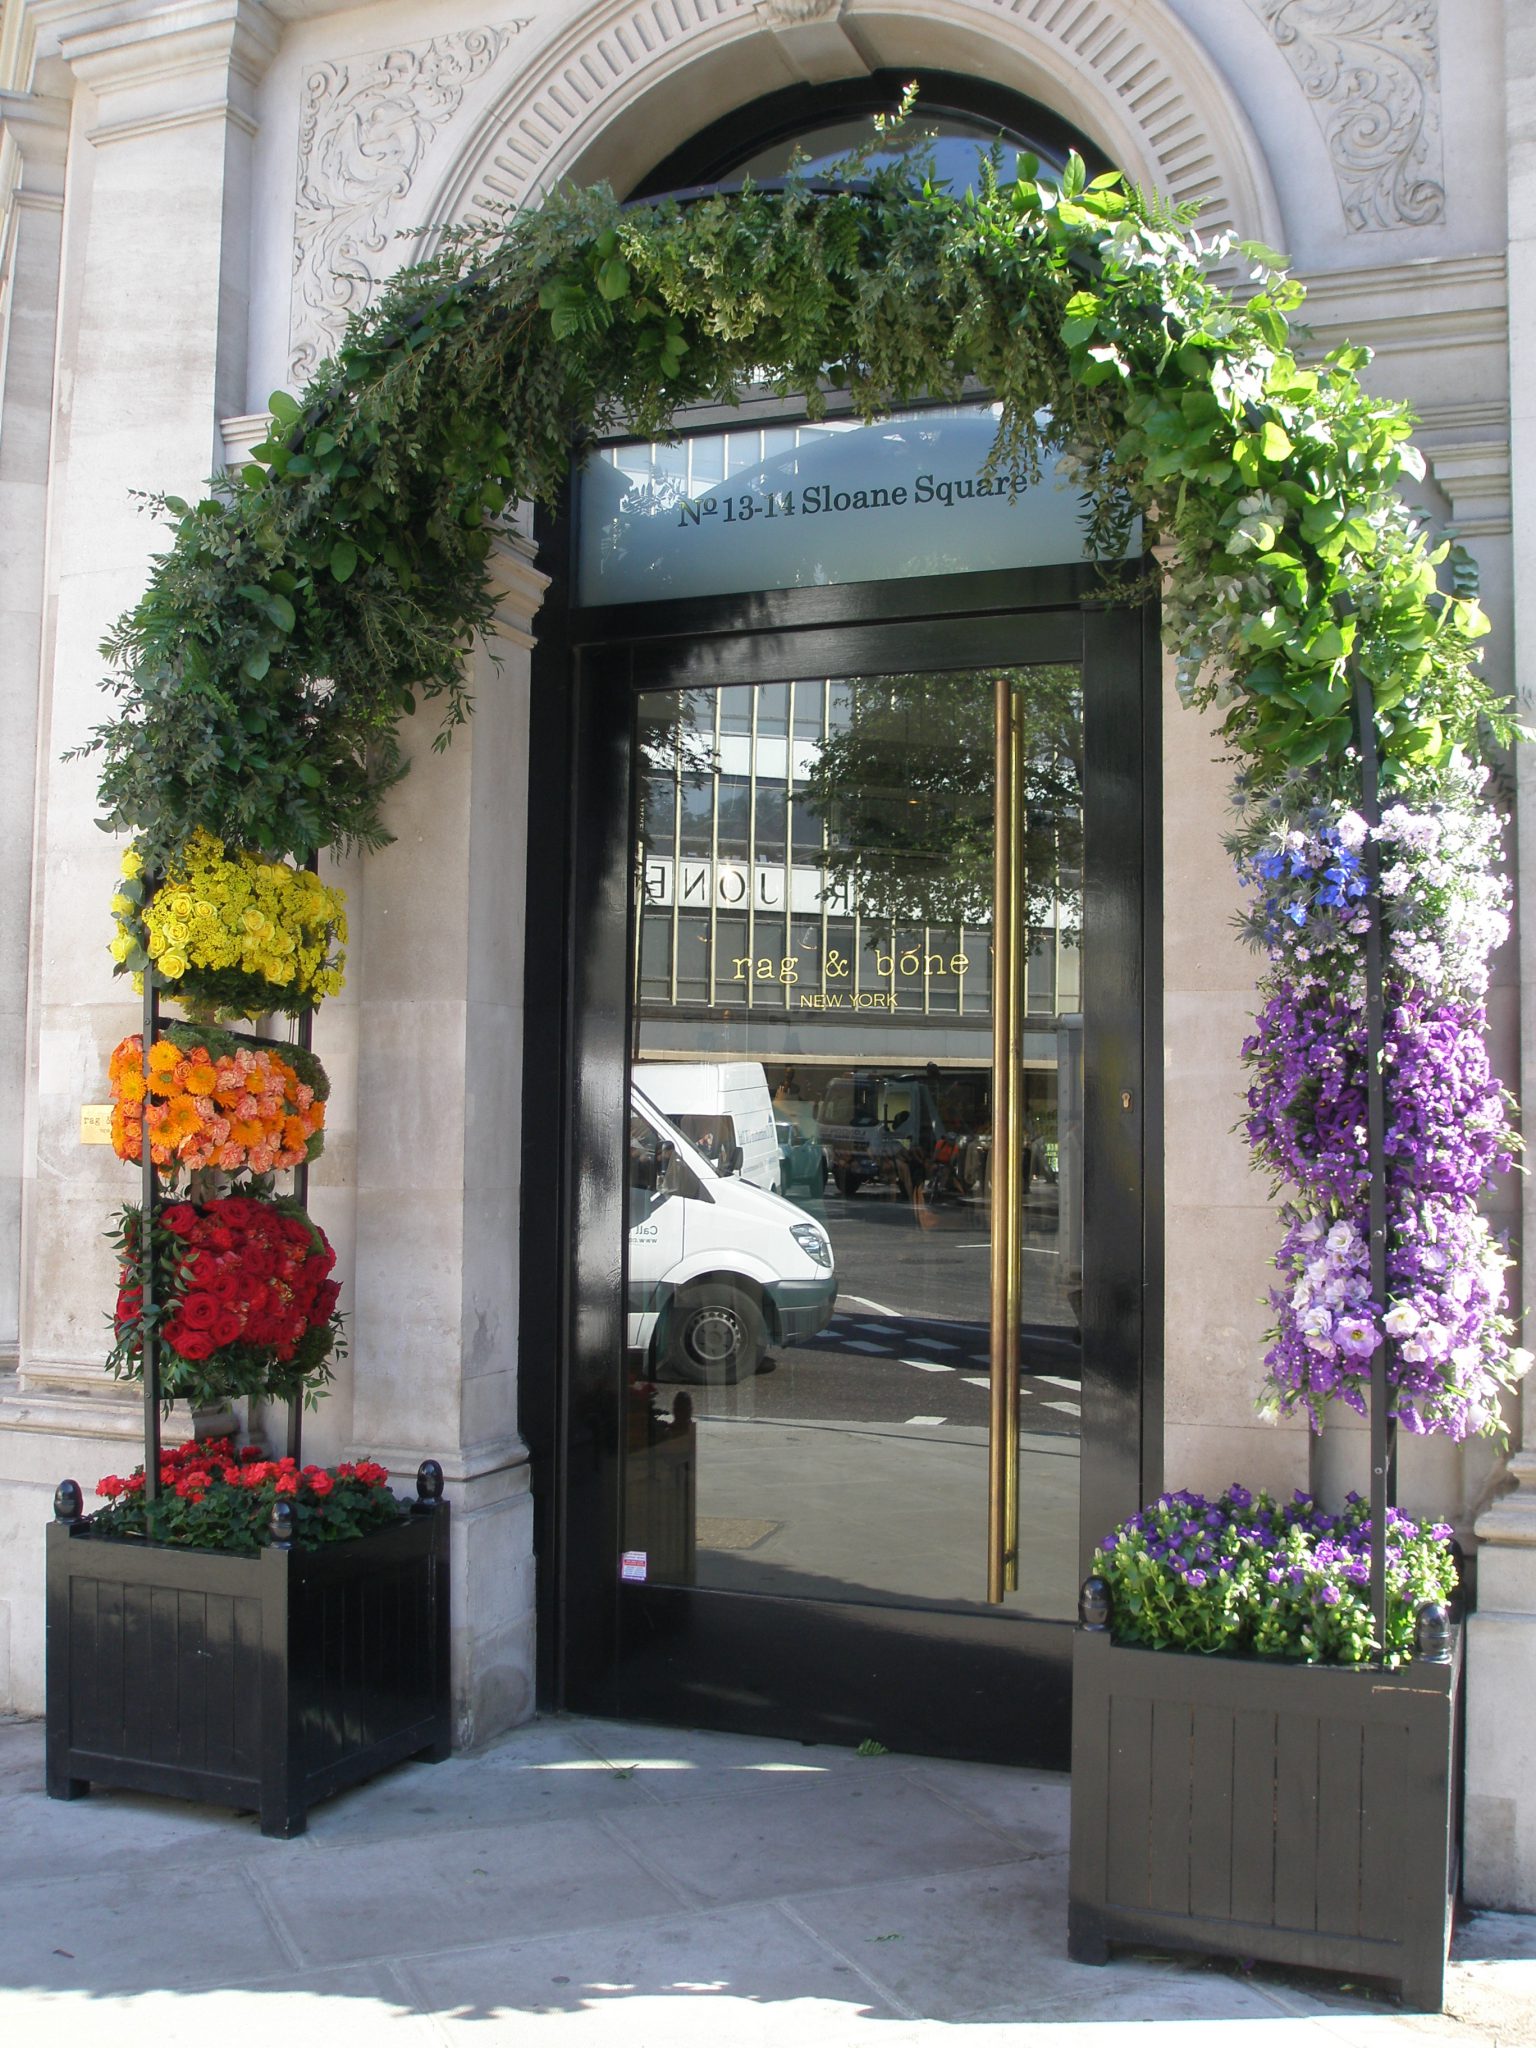 Rag & Bone, which is located at one corner of the Sloane Square Hotel's block, presented a much simpler display in 2014 than their 2013 entry in the Chelsea in Bloom competition...which had won them a Gold.